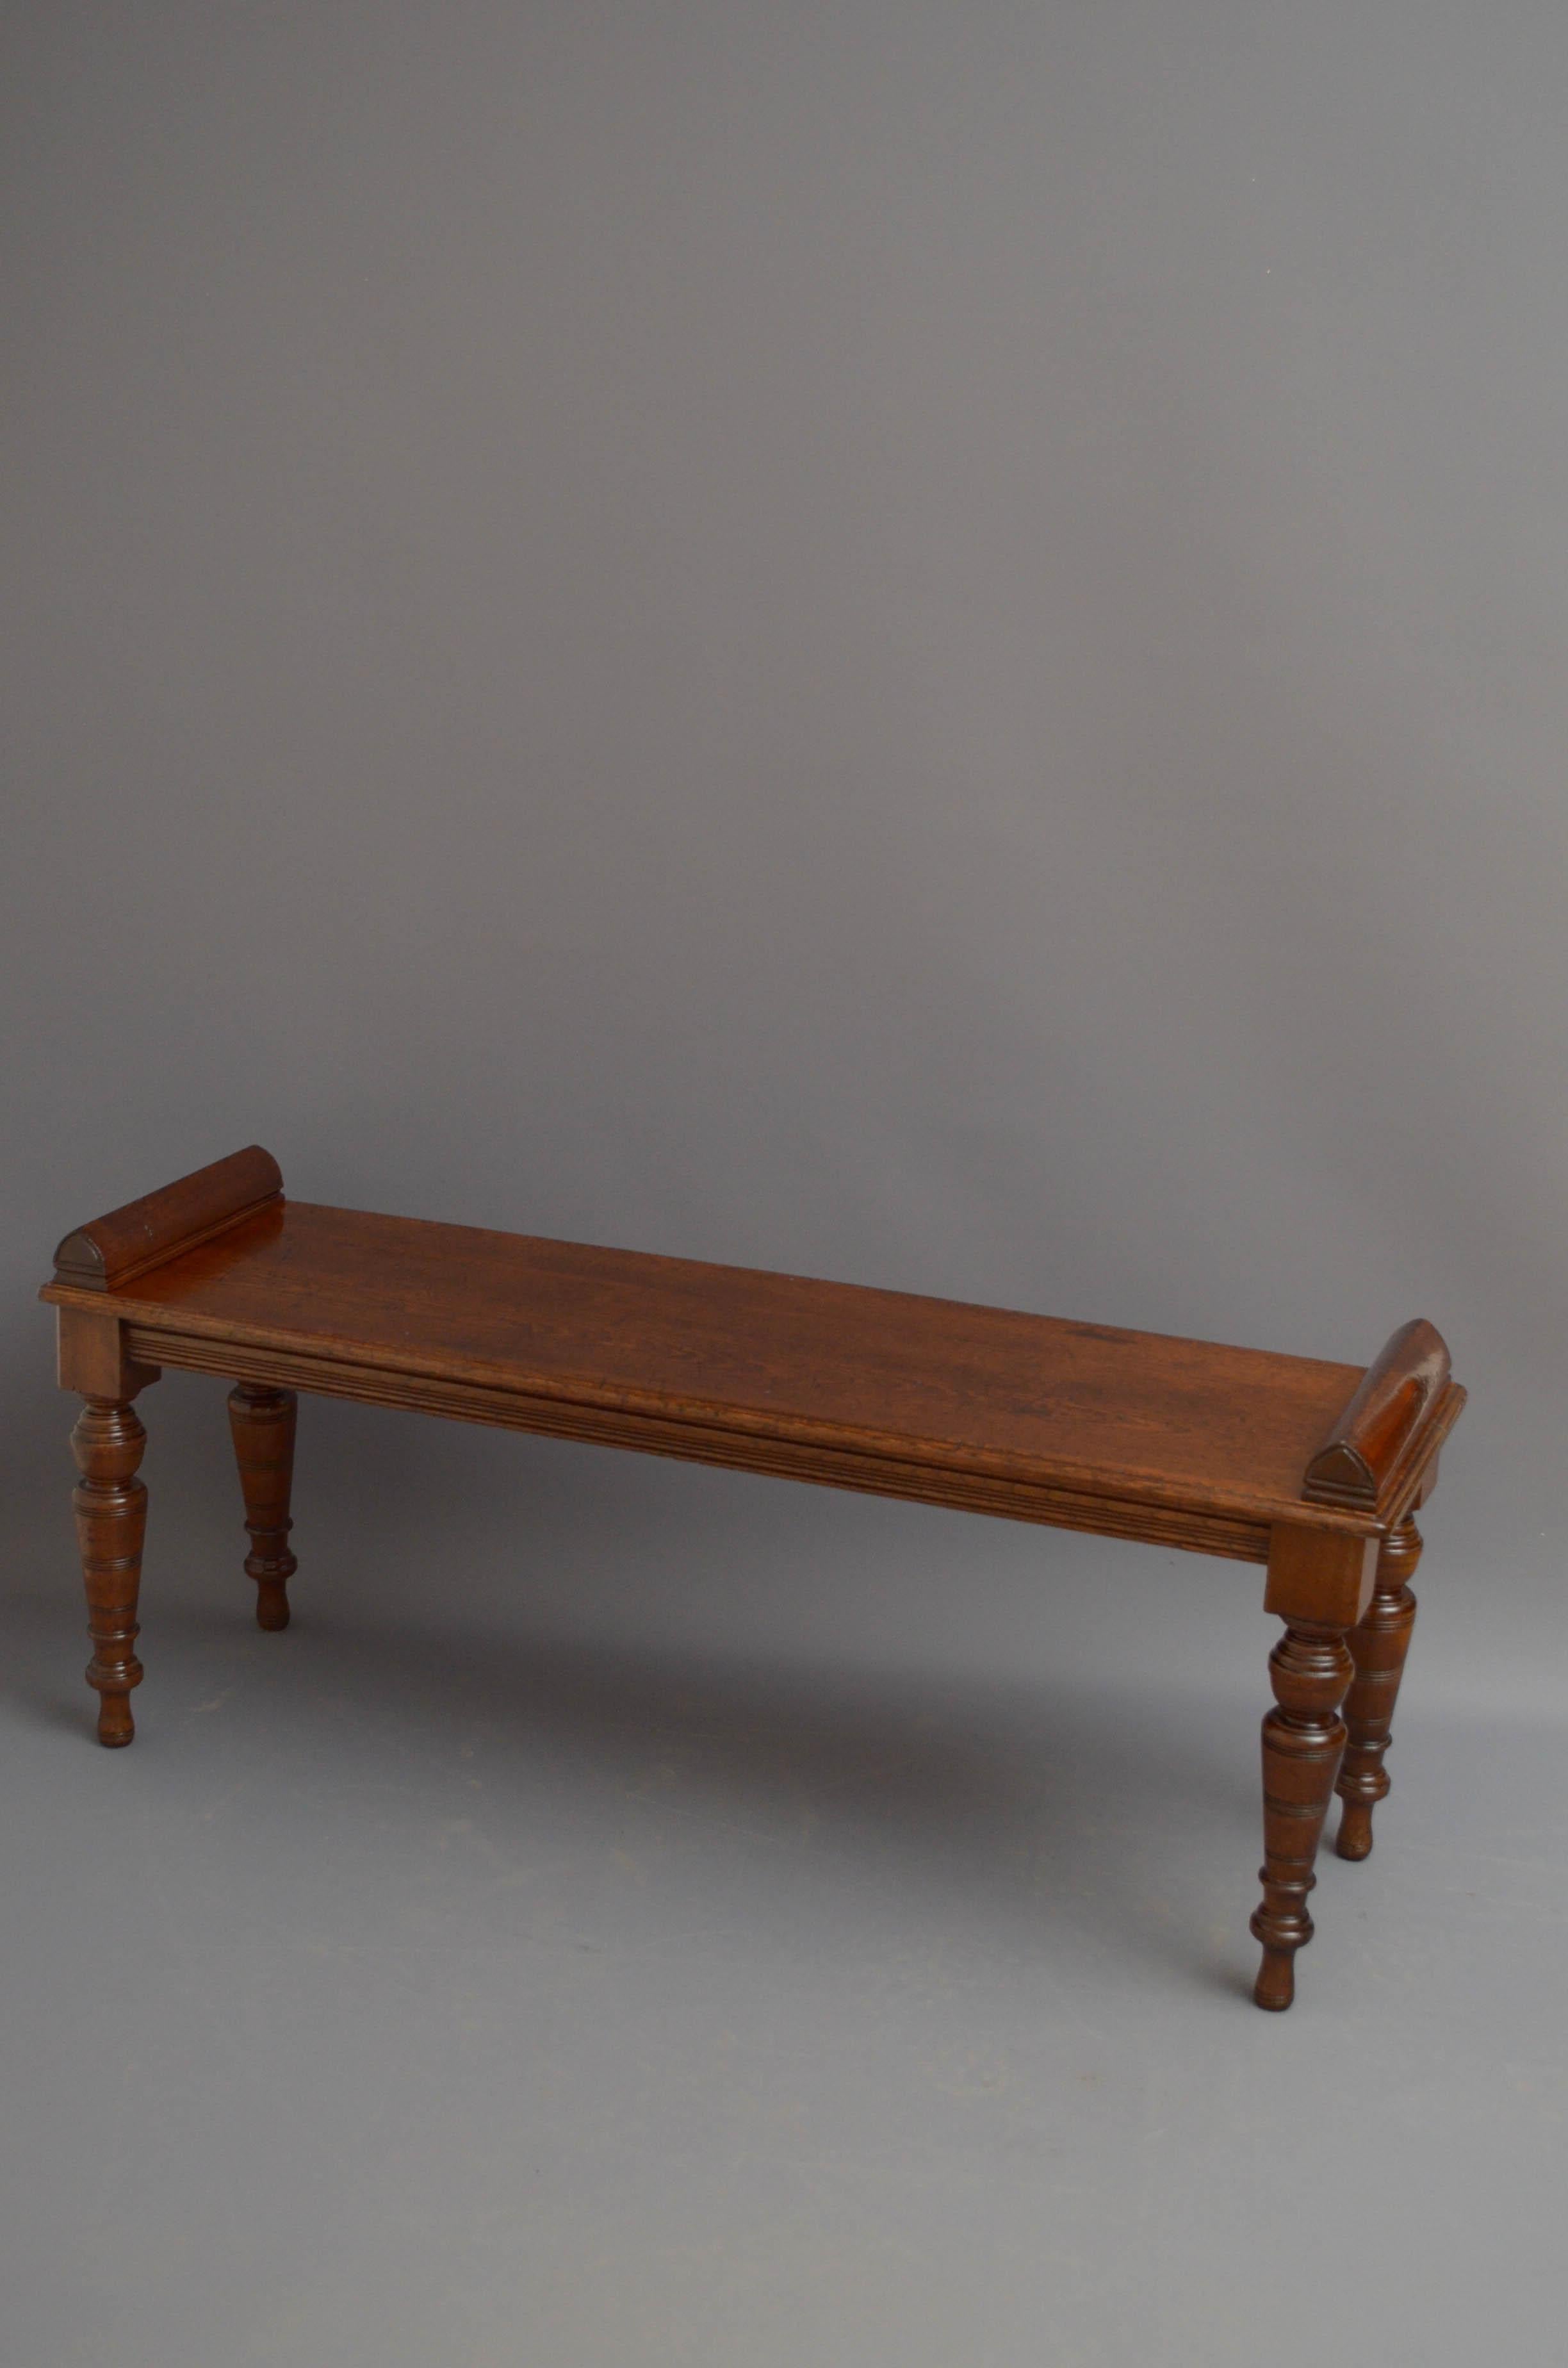 St04 Victorian oak hall bench, having oblong seat with carved ends and moulded edge above a reeded frieze all standing on turned, tapered and ringed legs. This antique bench has been syamthetically restored and is ready to place at home.